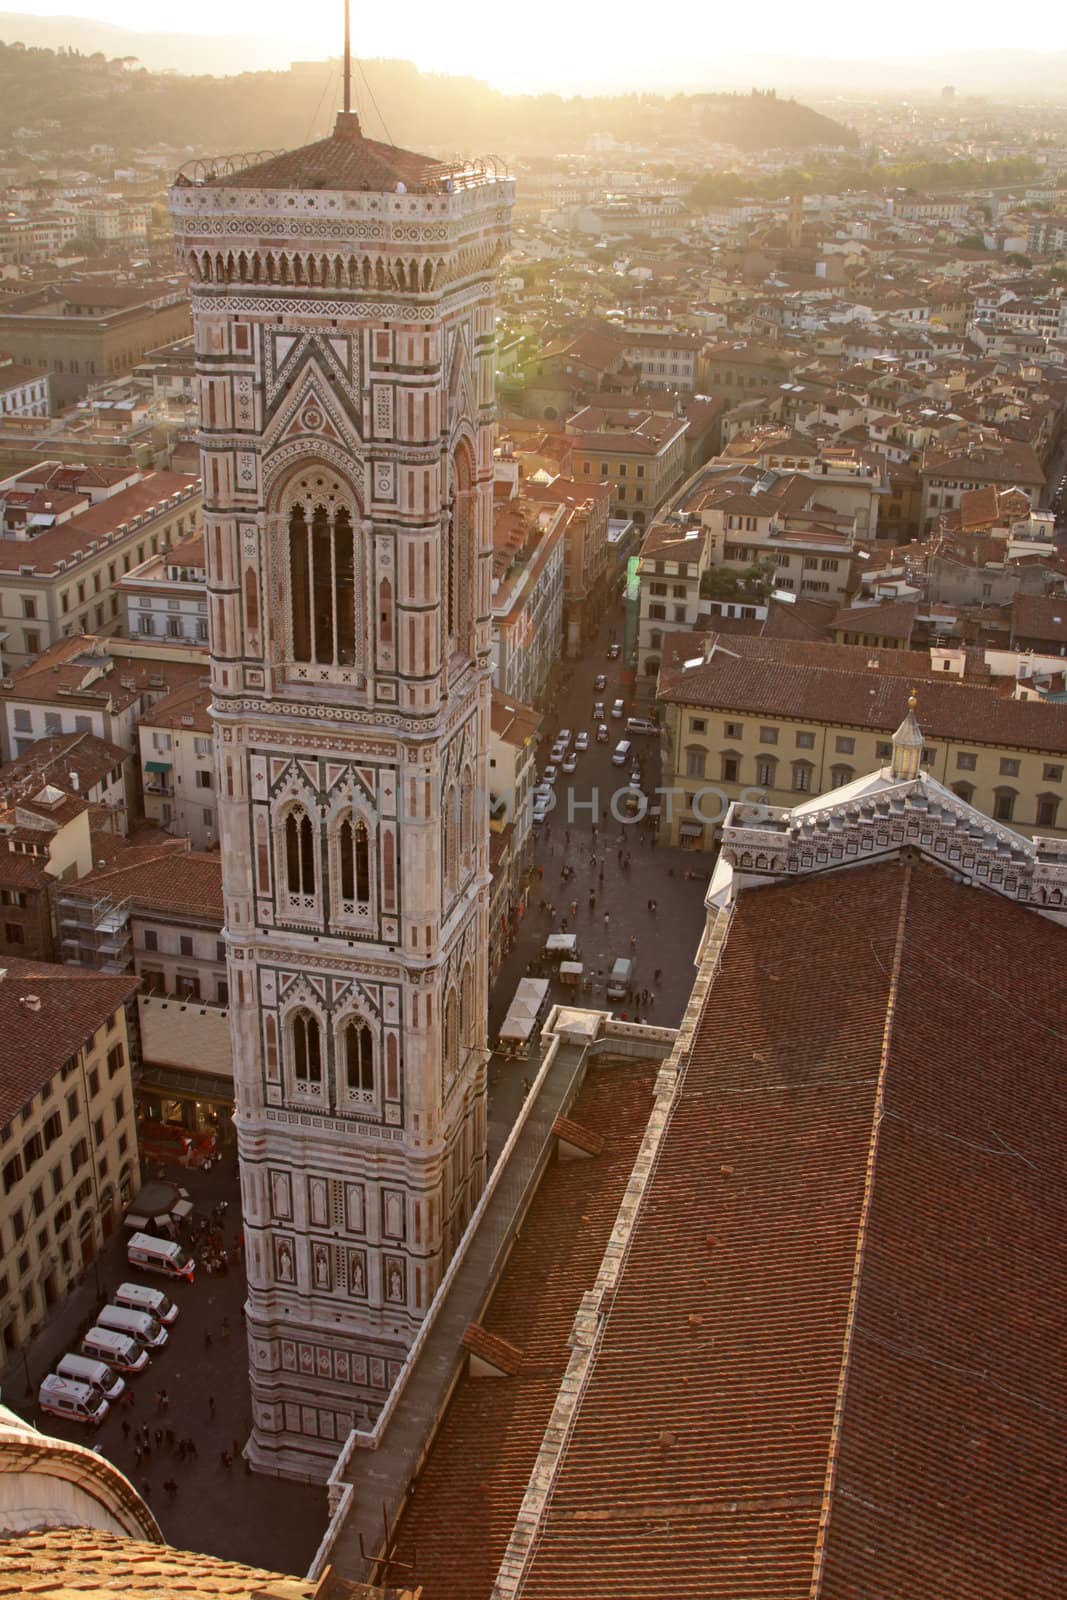 Giotto's Bell Tower shot from the top of Duomo at dusk.  The tower is located in Florence, Tuscany, in Italy.
